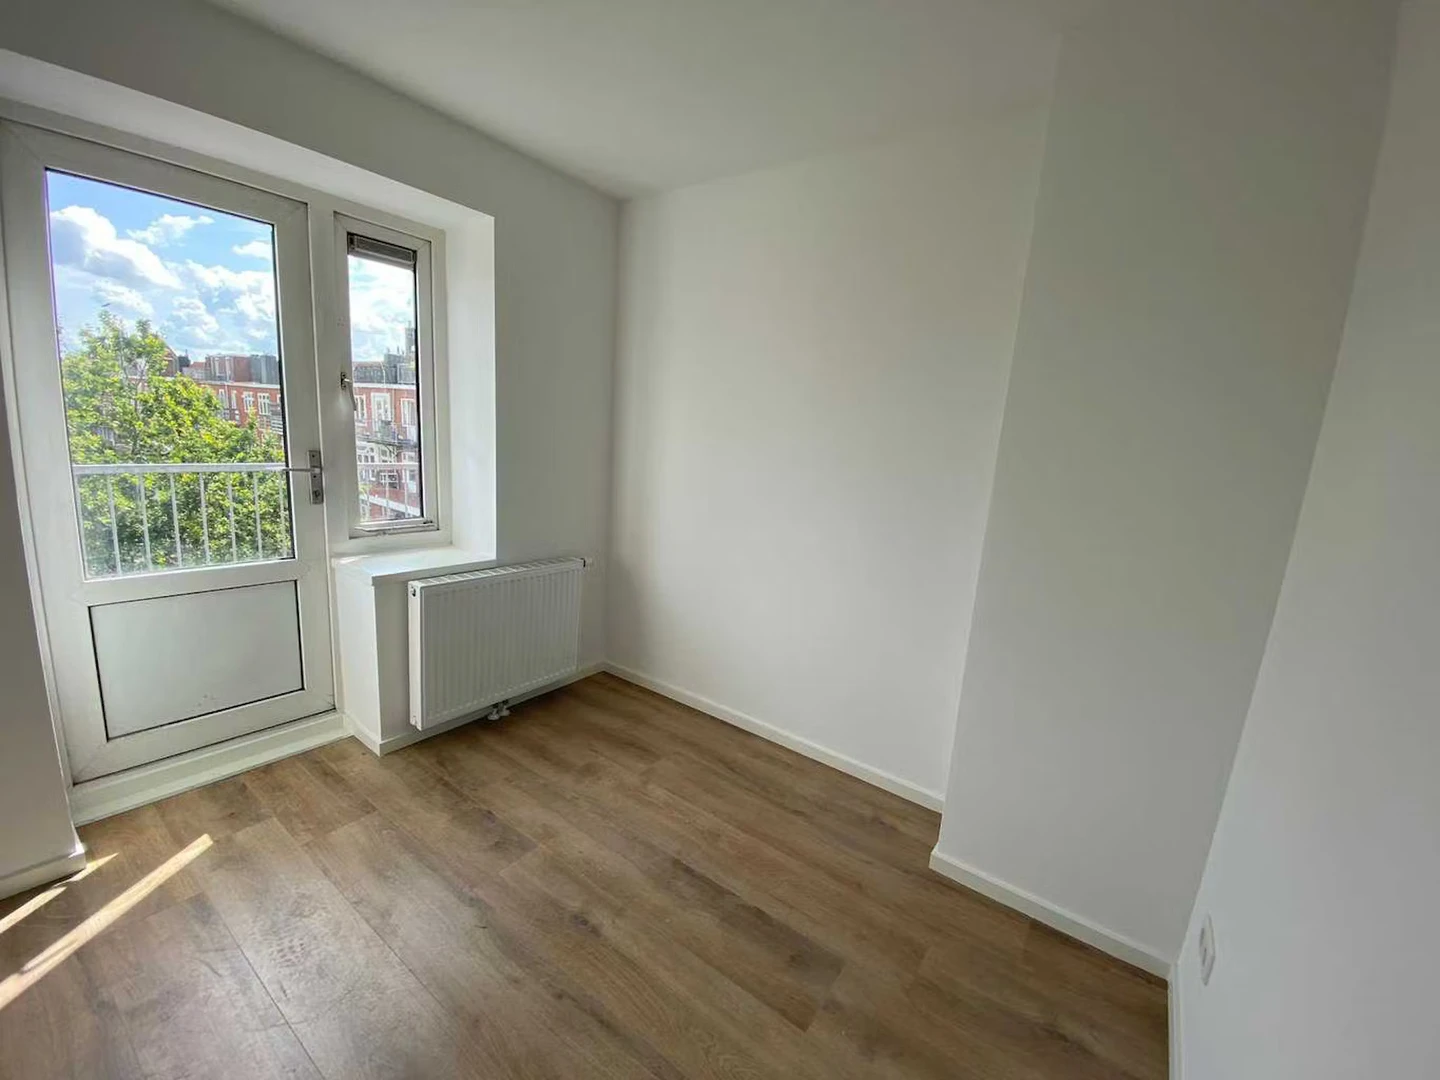 Accommodation with 3 bedrooms in Groningen